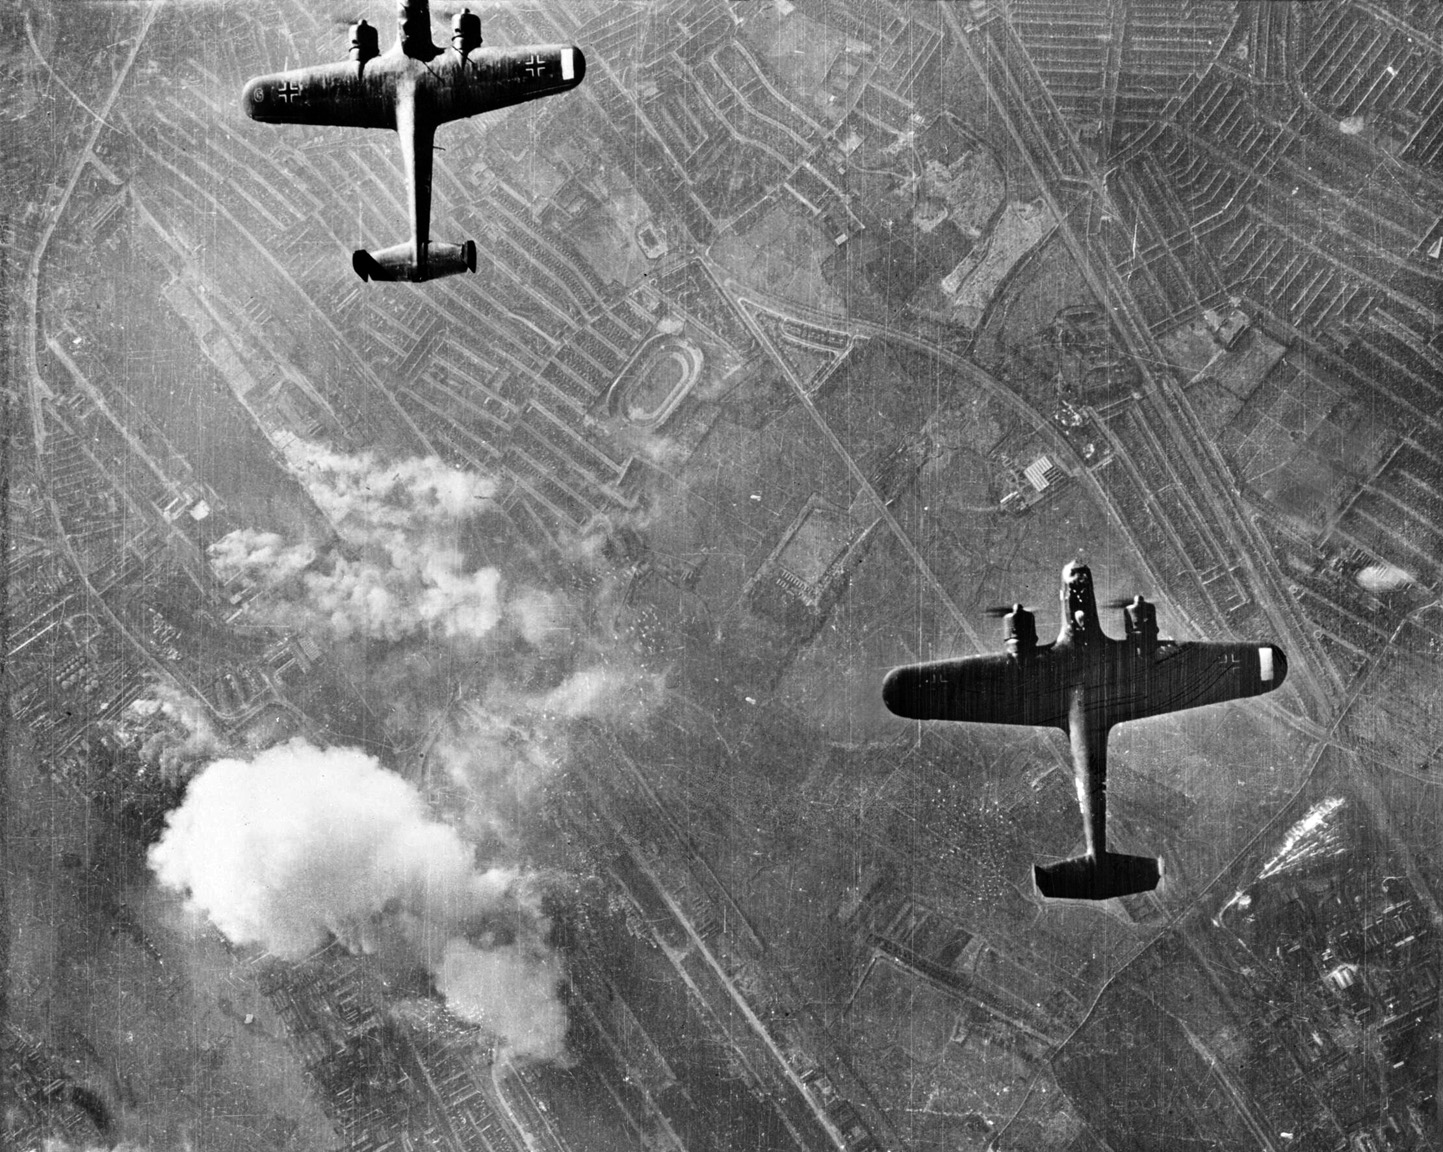 A pair of Luftwaffe Dornier Do-17 bombers flies above London during the Blitz of 1940. Cowboy Blatchford and the pilots of the RAF thwarted the German attempt to destroy British cities.